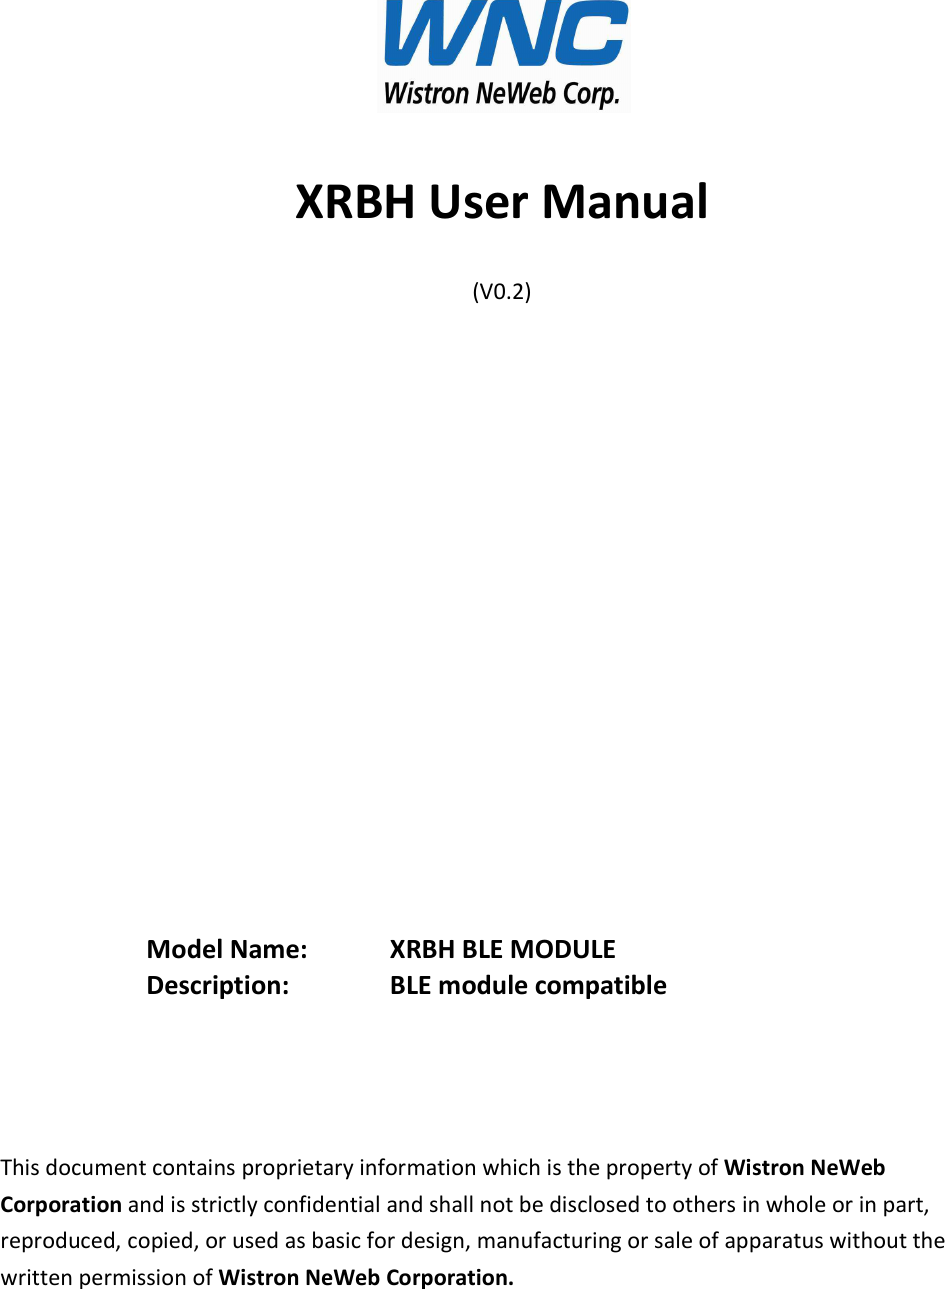  XRBH User Manual (V0.2)                  Model Name:     XRBH BLE MODULE Description:     BLE module compatible     This document contains proprietary information which is the property of Wistron NeWeb Corporation and is strictly confidential and shall not be disclosed to others in whole or in part, reproduced, copied, or used as basic for design, manufacturing or sale of apparatus without the written permission of Wistron NeWeb Corporation.  